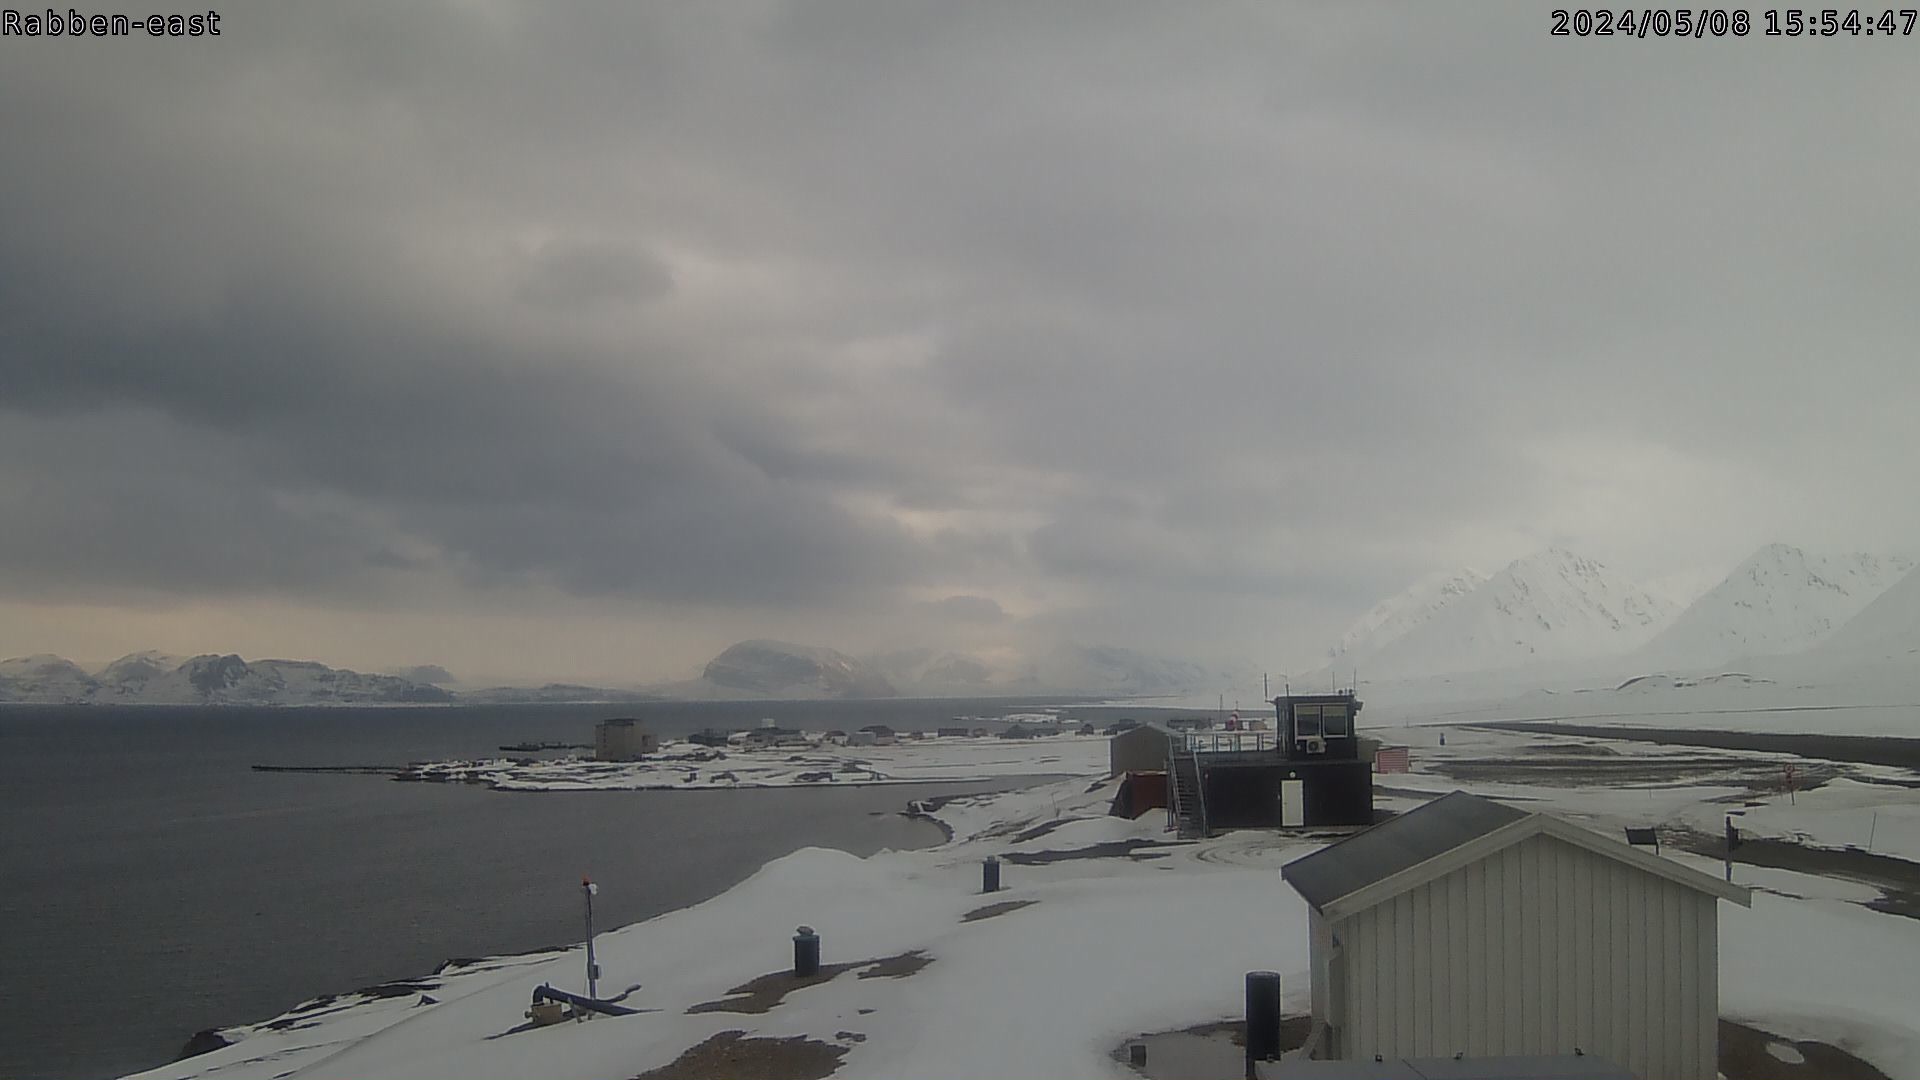 Web Camera is located in Svalbard.